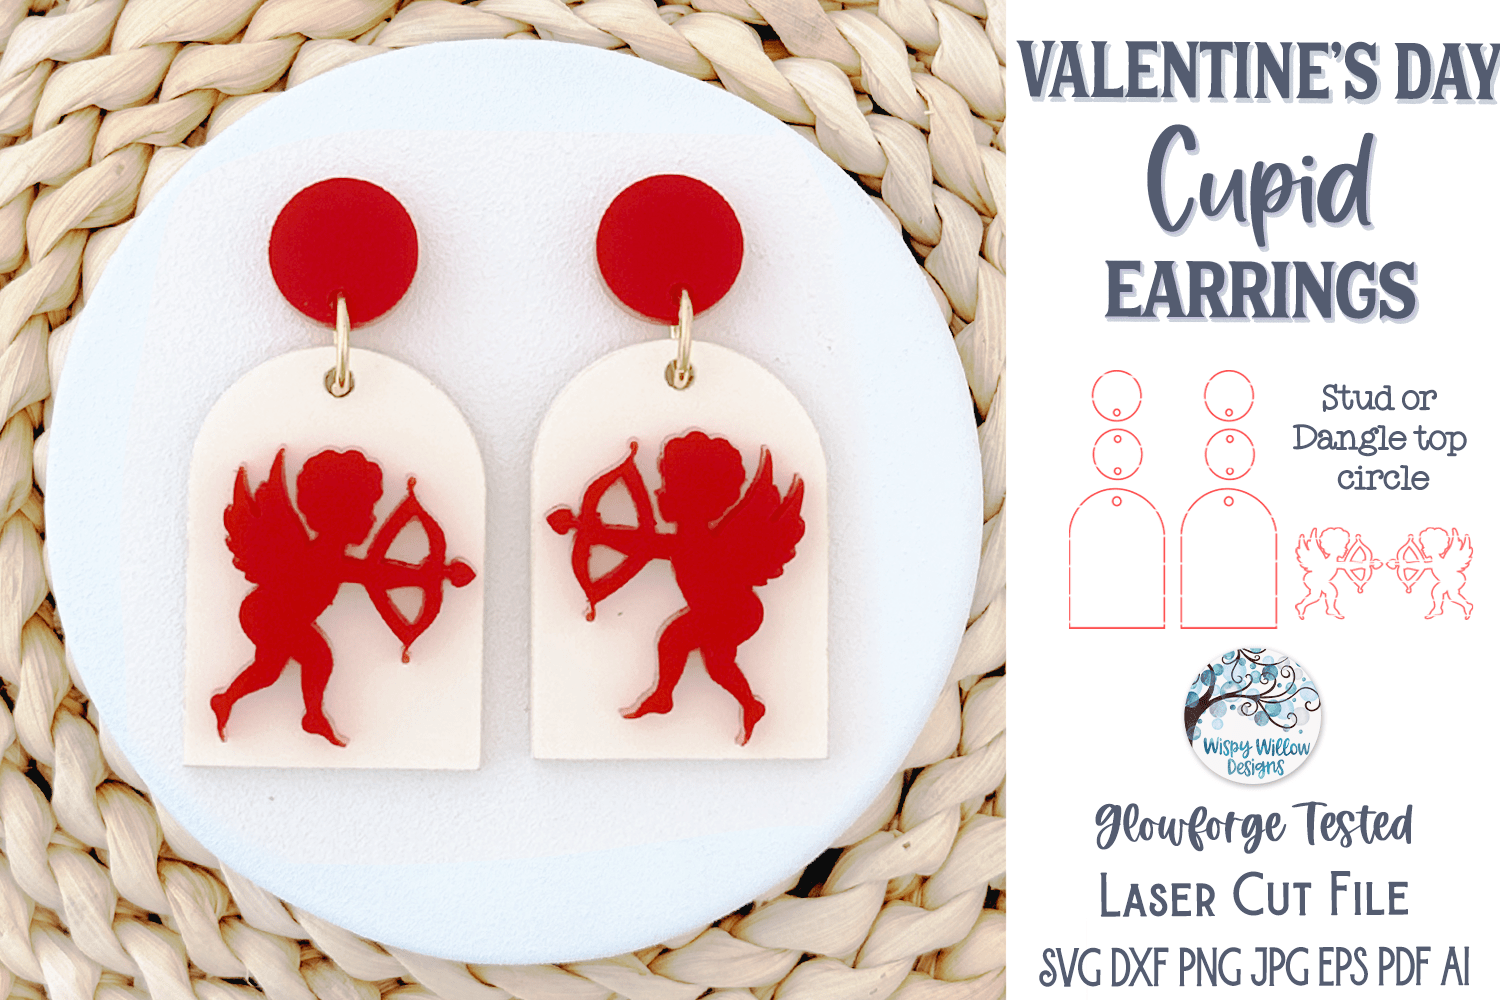 Valentine's Day Cupid Earring SVG for Glowforge Laser Cutter Wispy Willow Designs Company